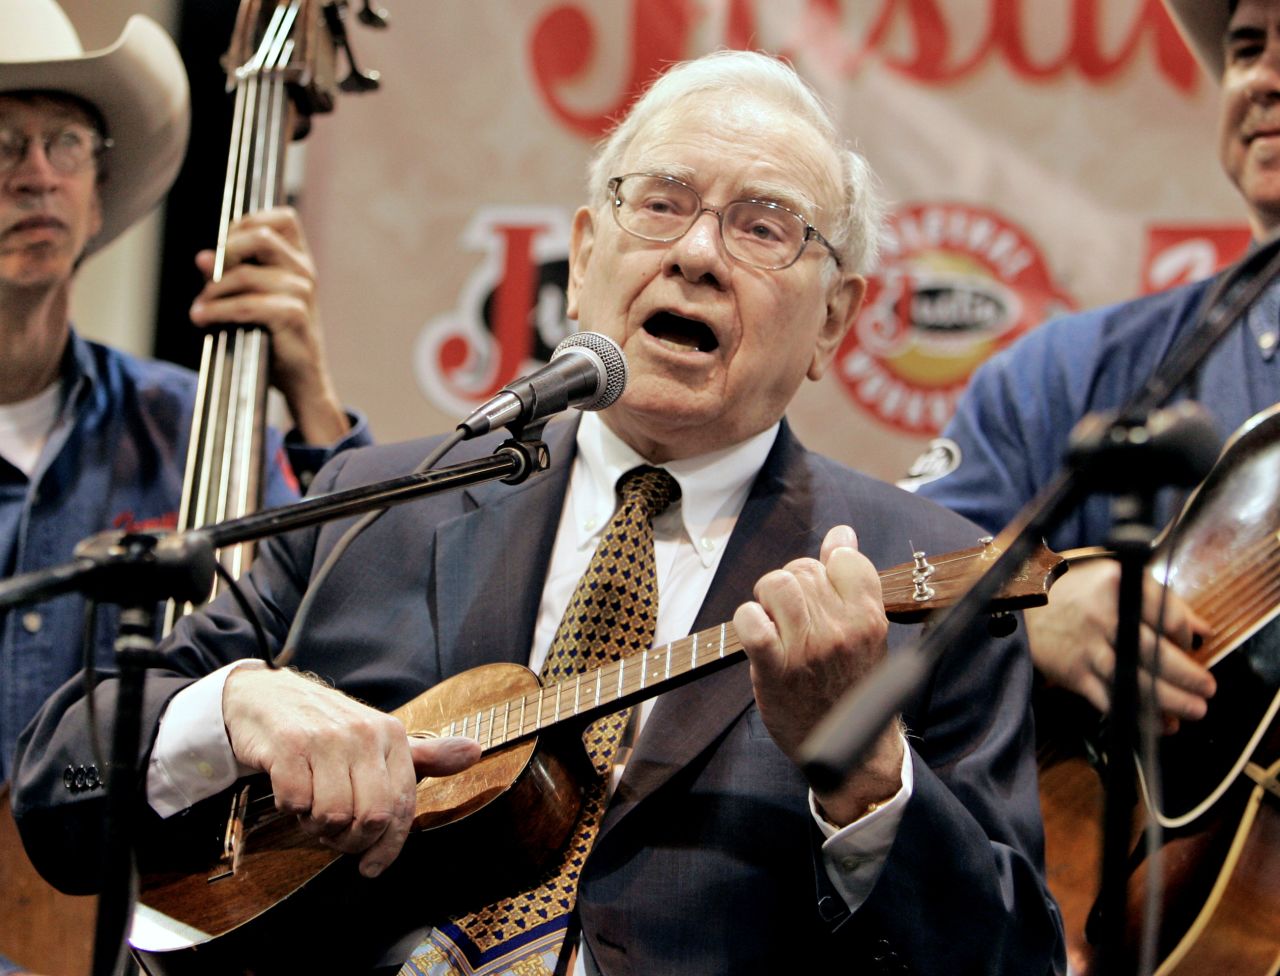 Buffett plays the ukulele with a band during the Berkshire Hathaway meeting in 2007. He learned the instrument decades ago.